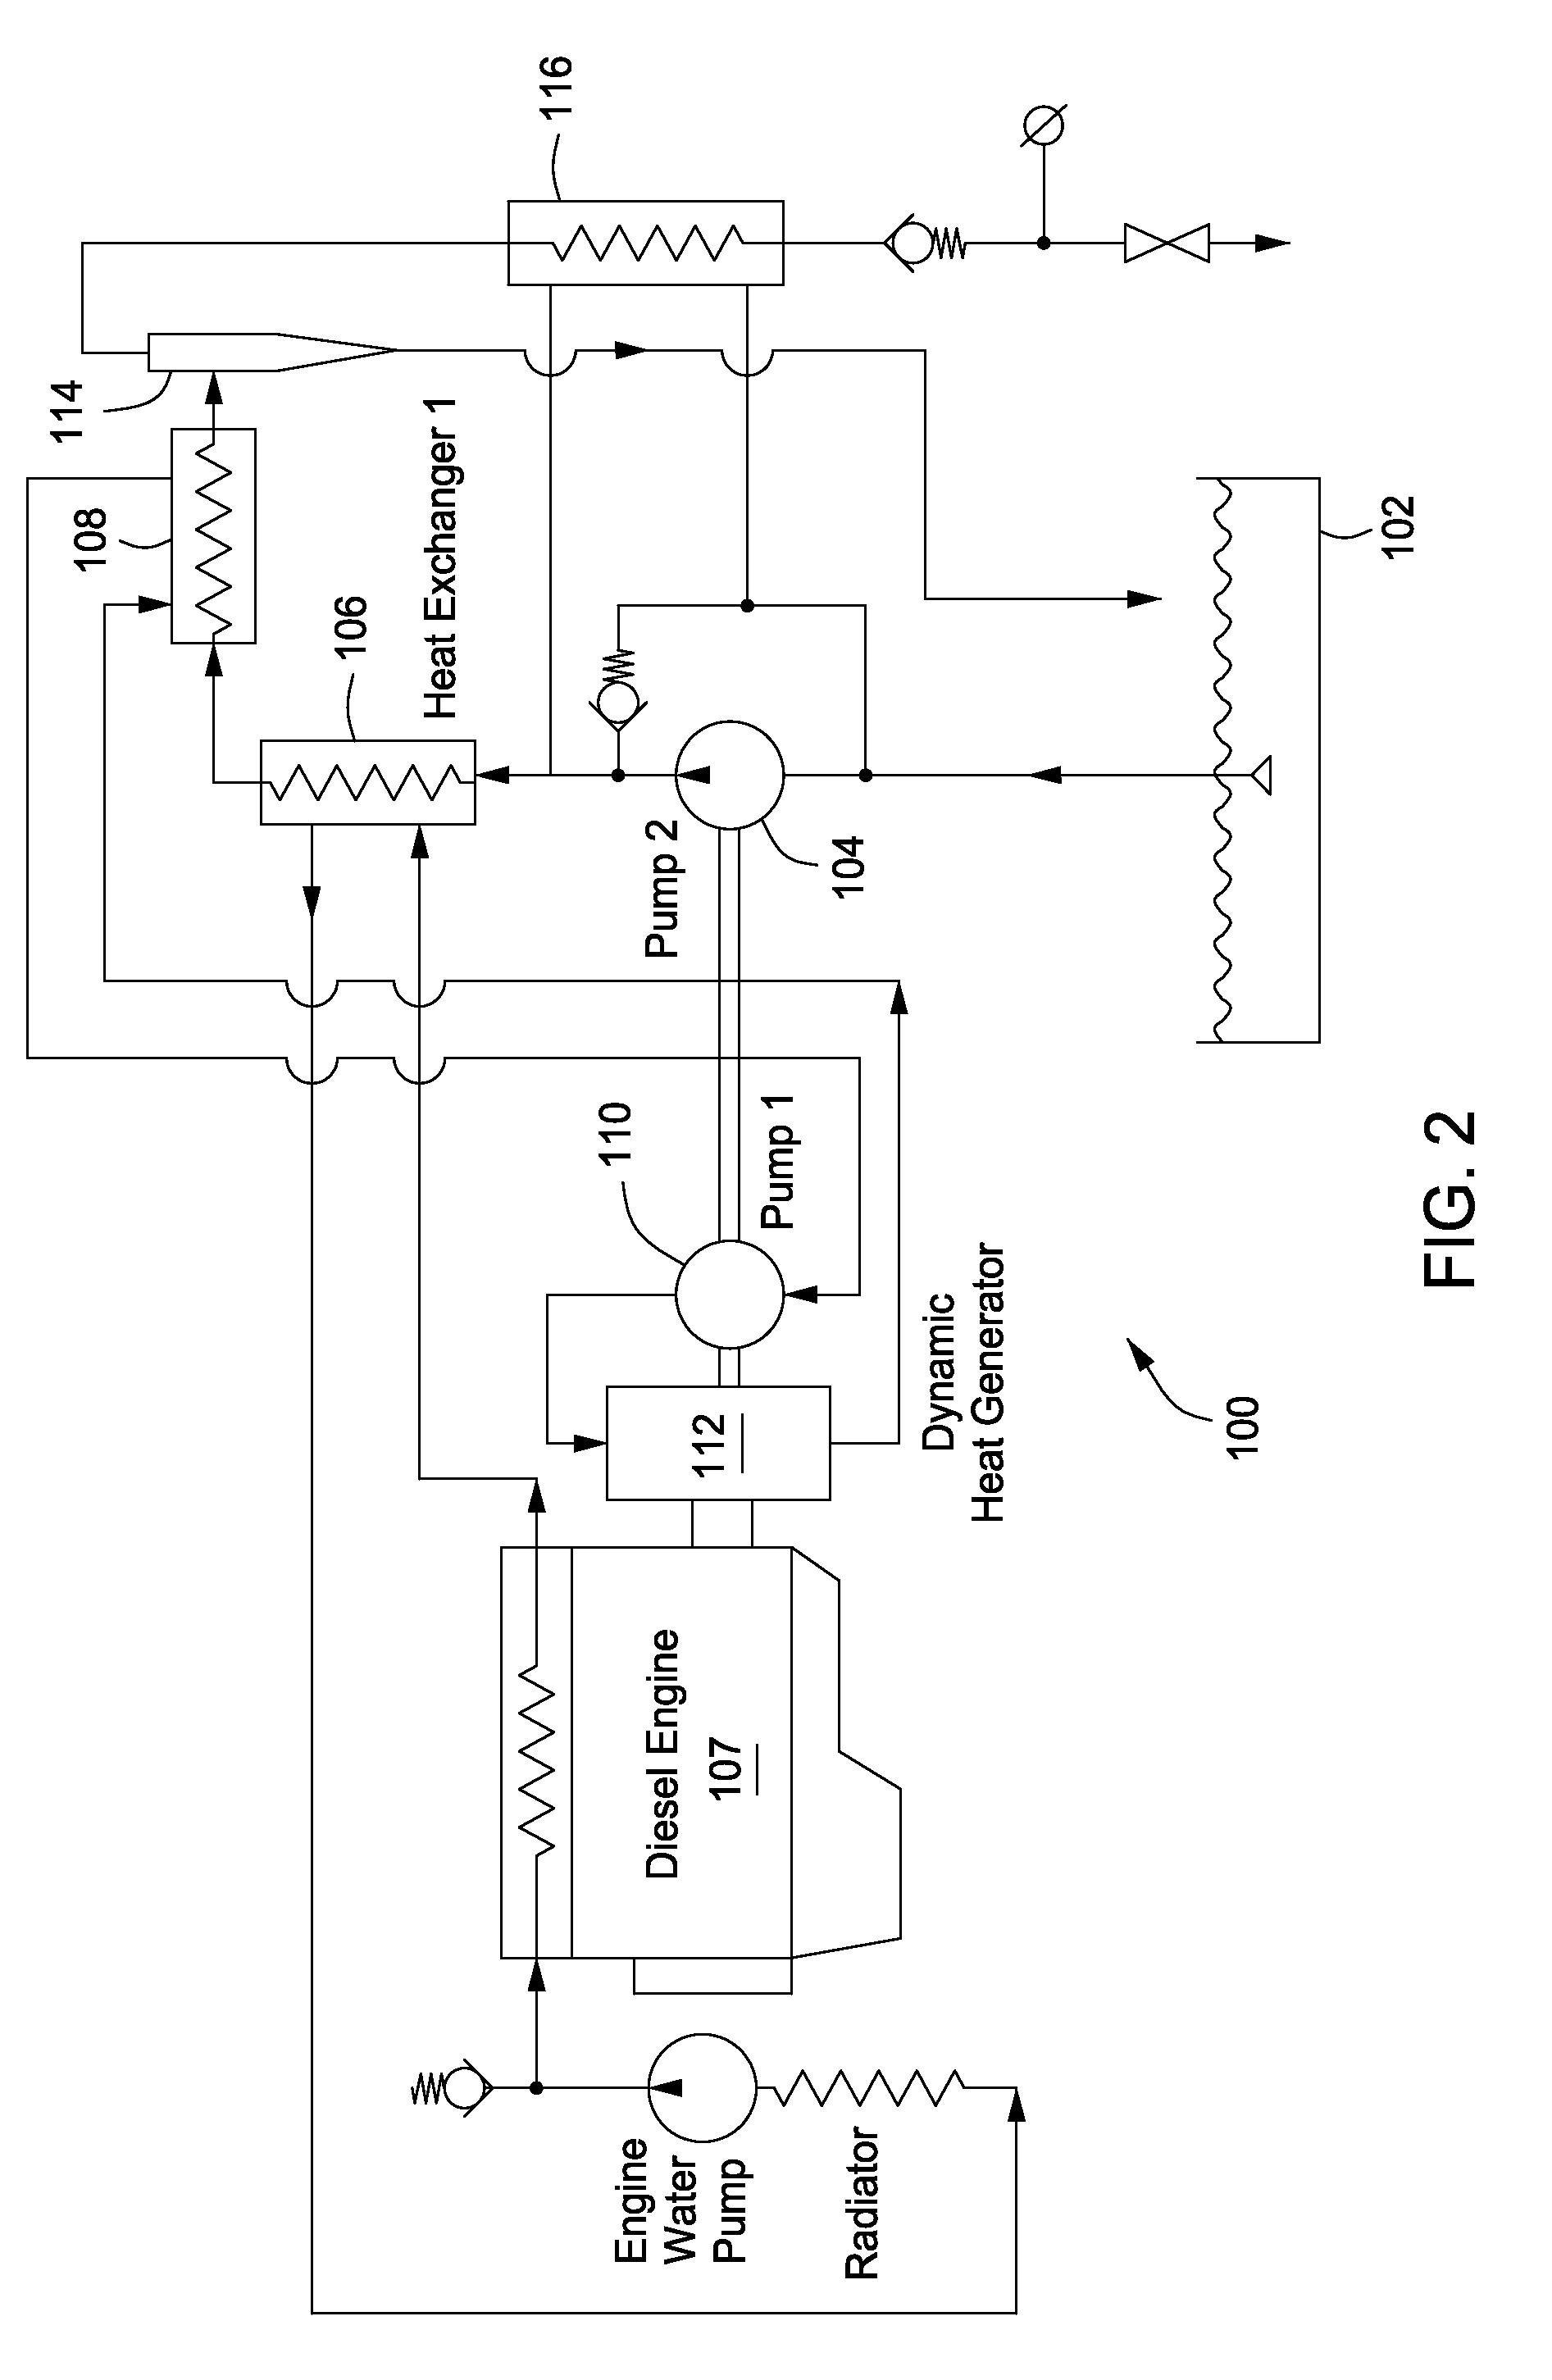 System and method for producing hot water without a flame